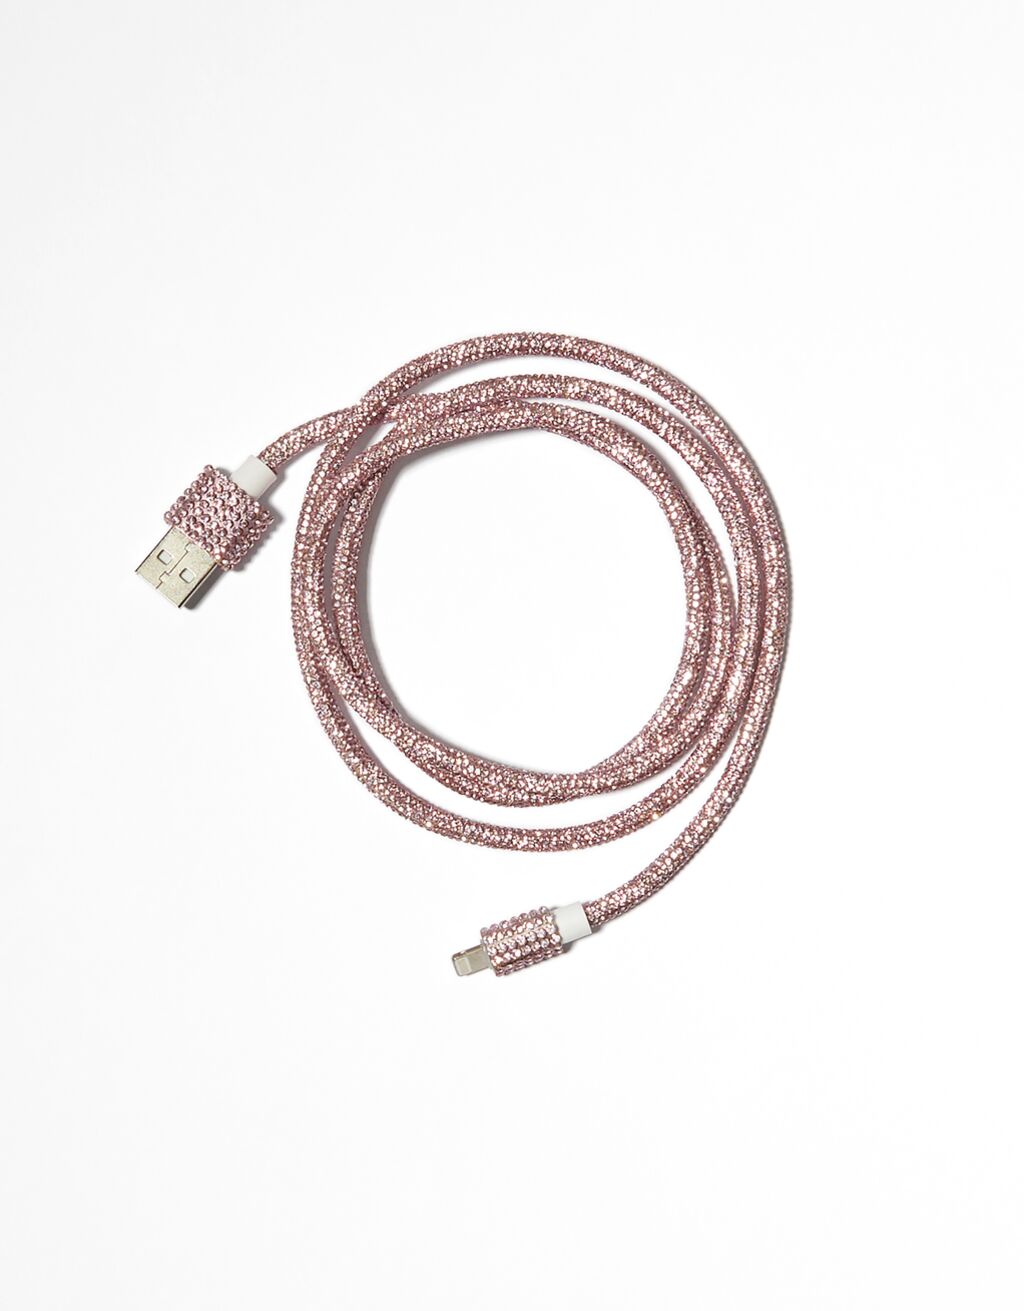 Embellished charging cable